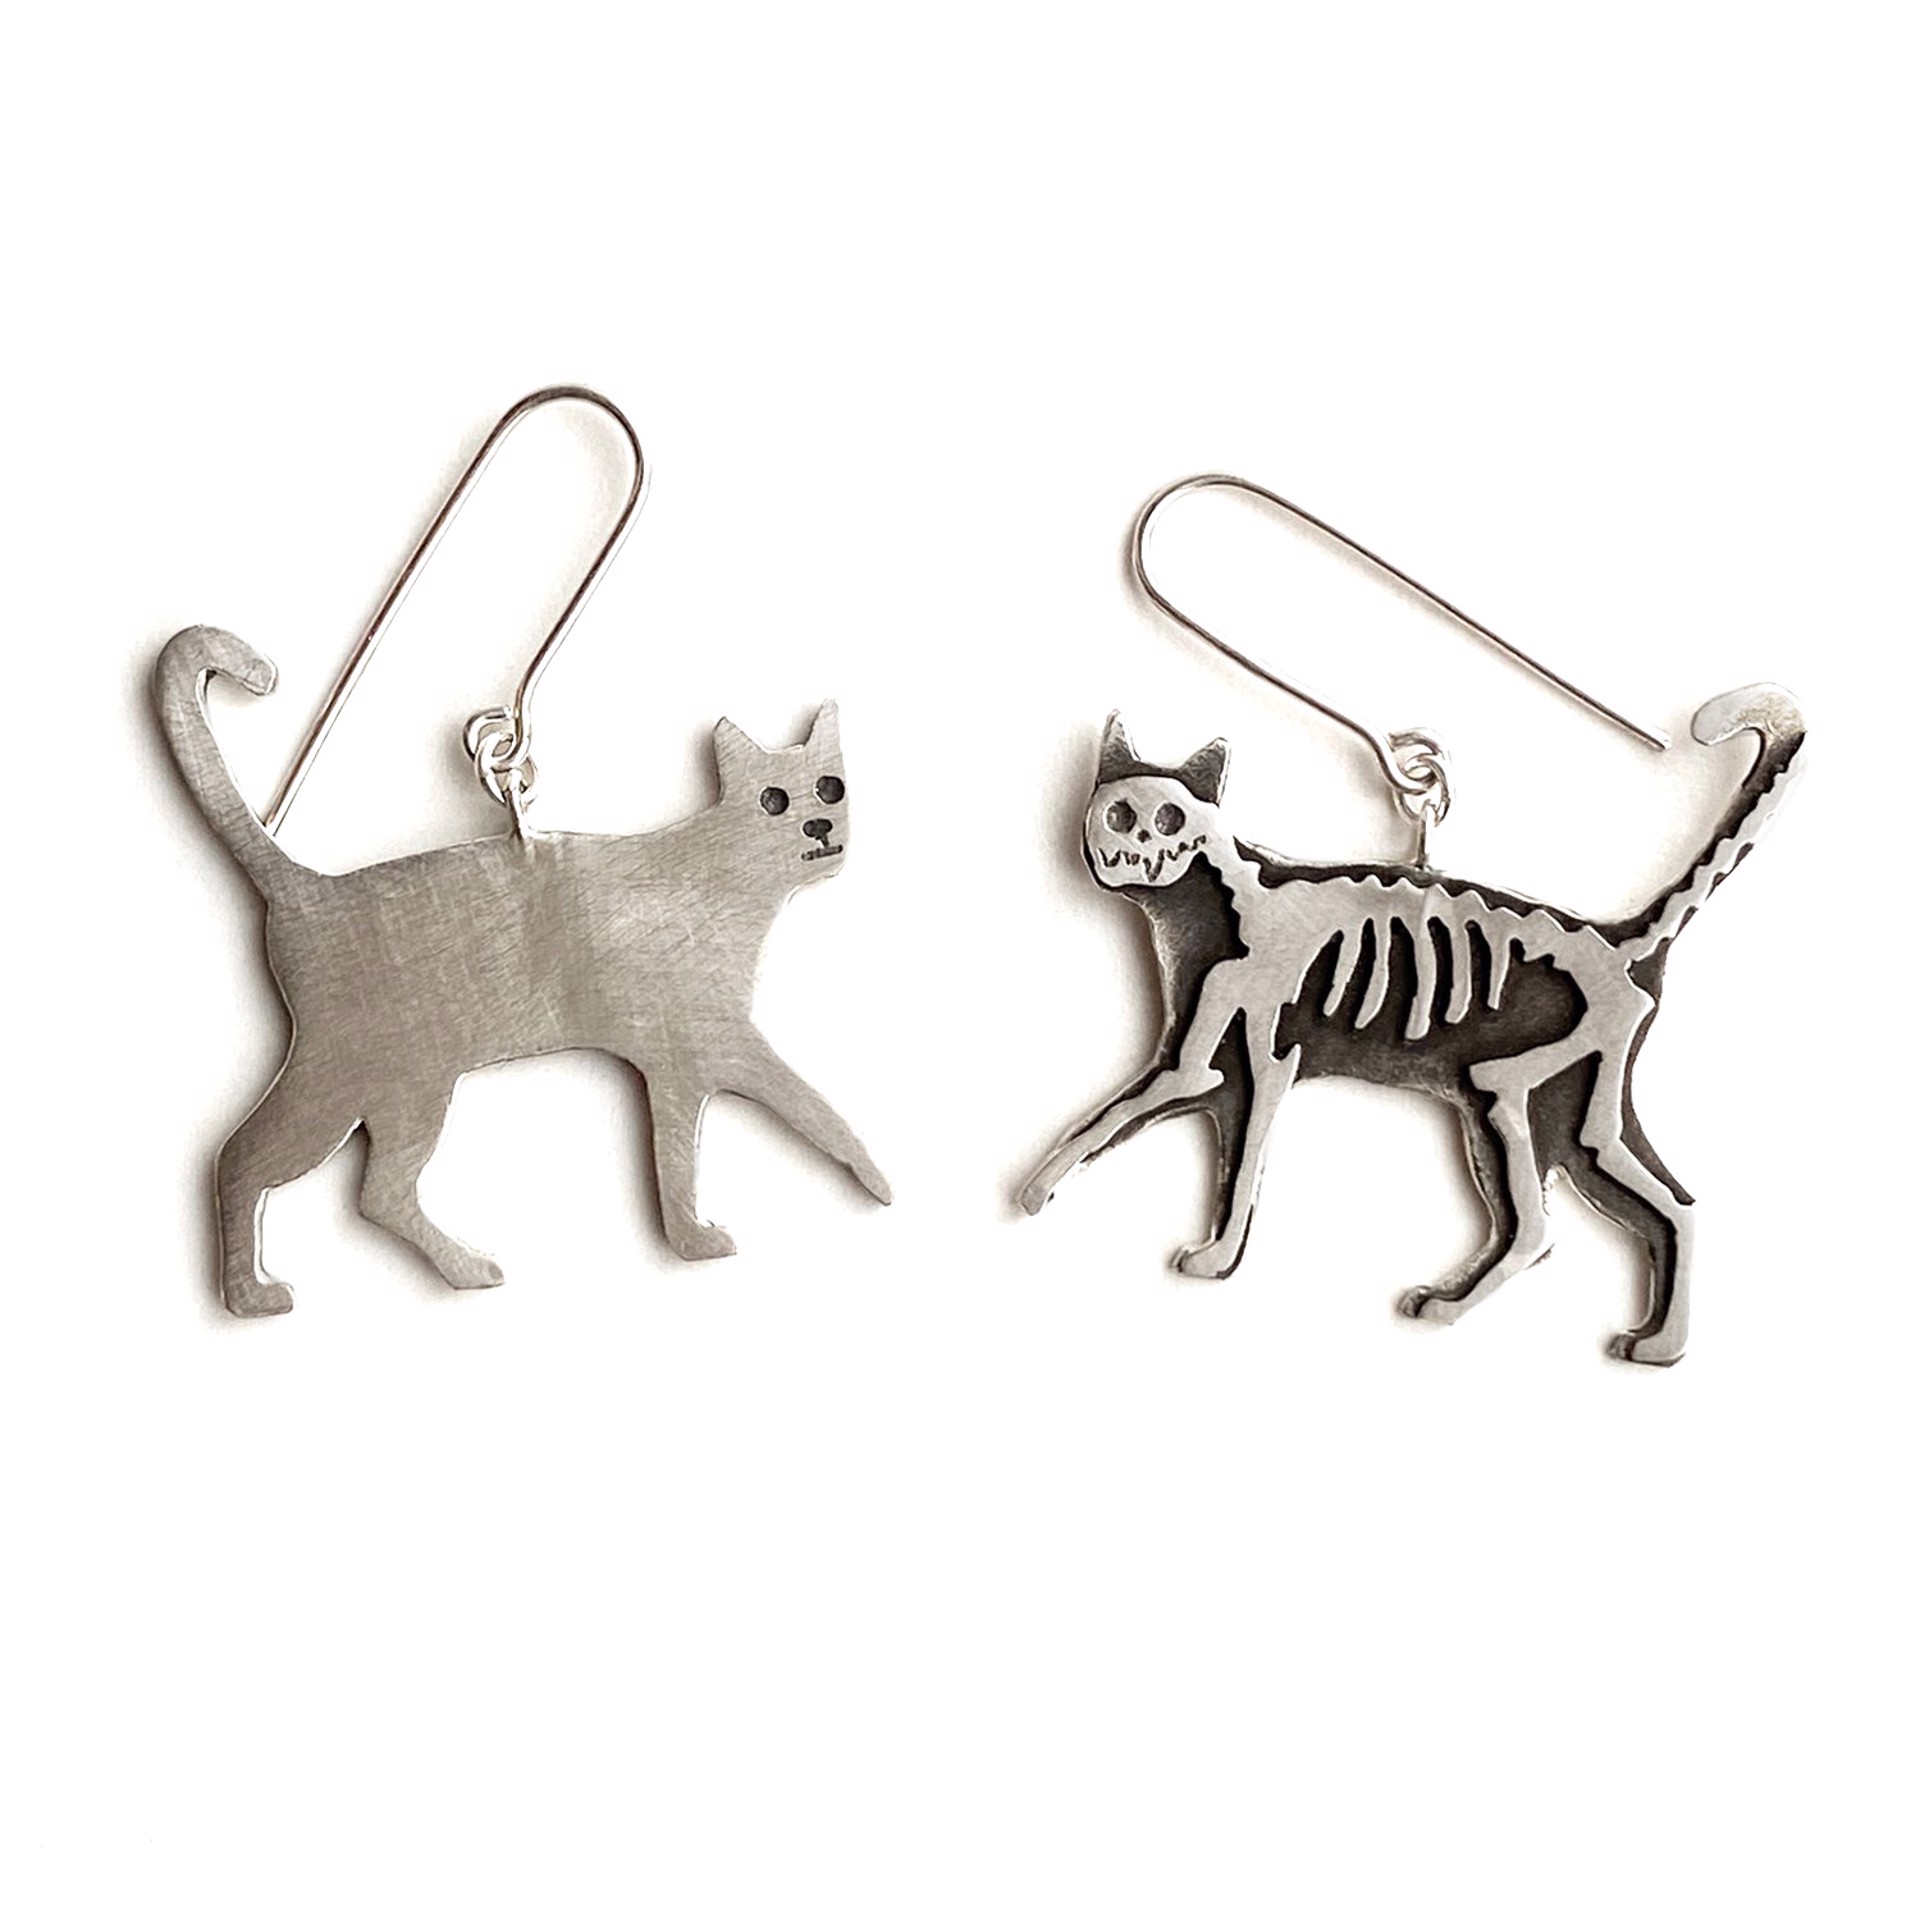 Double sided kitty earrings with sapphire butts by Susan Elnora